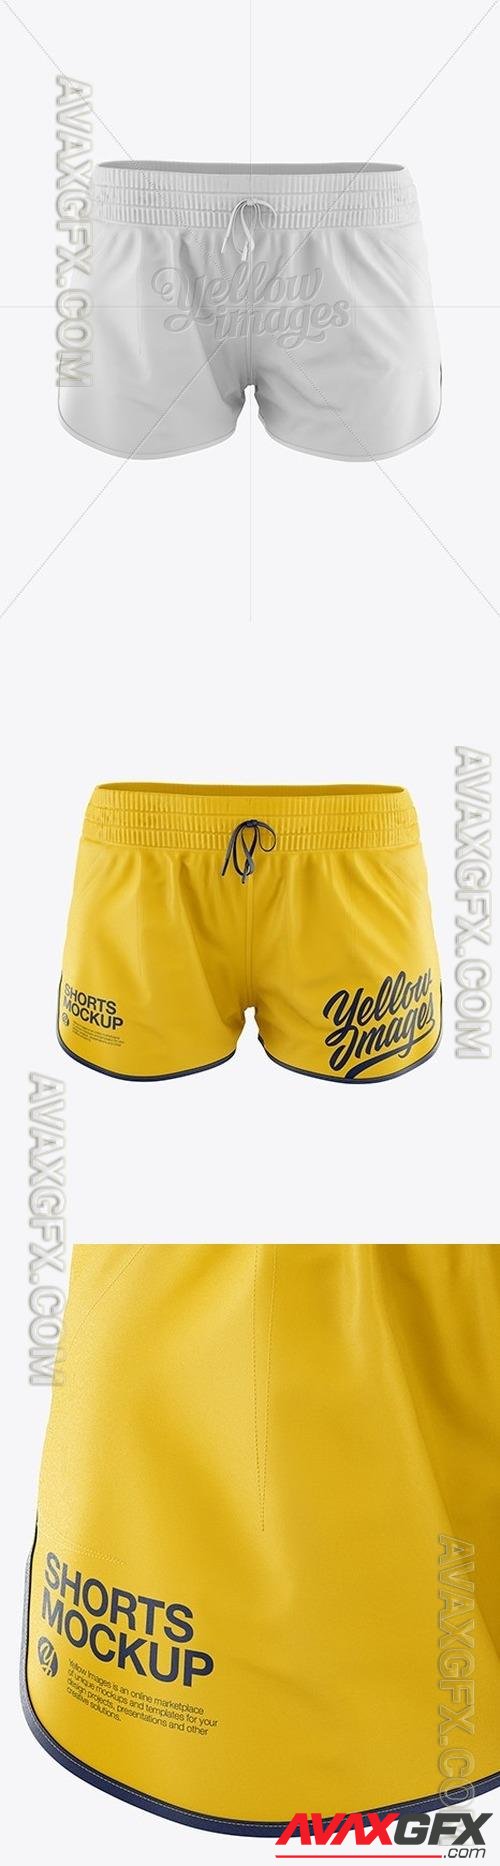 Fitness Shorts Mockup - Front View 19301